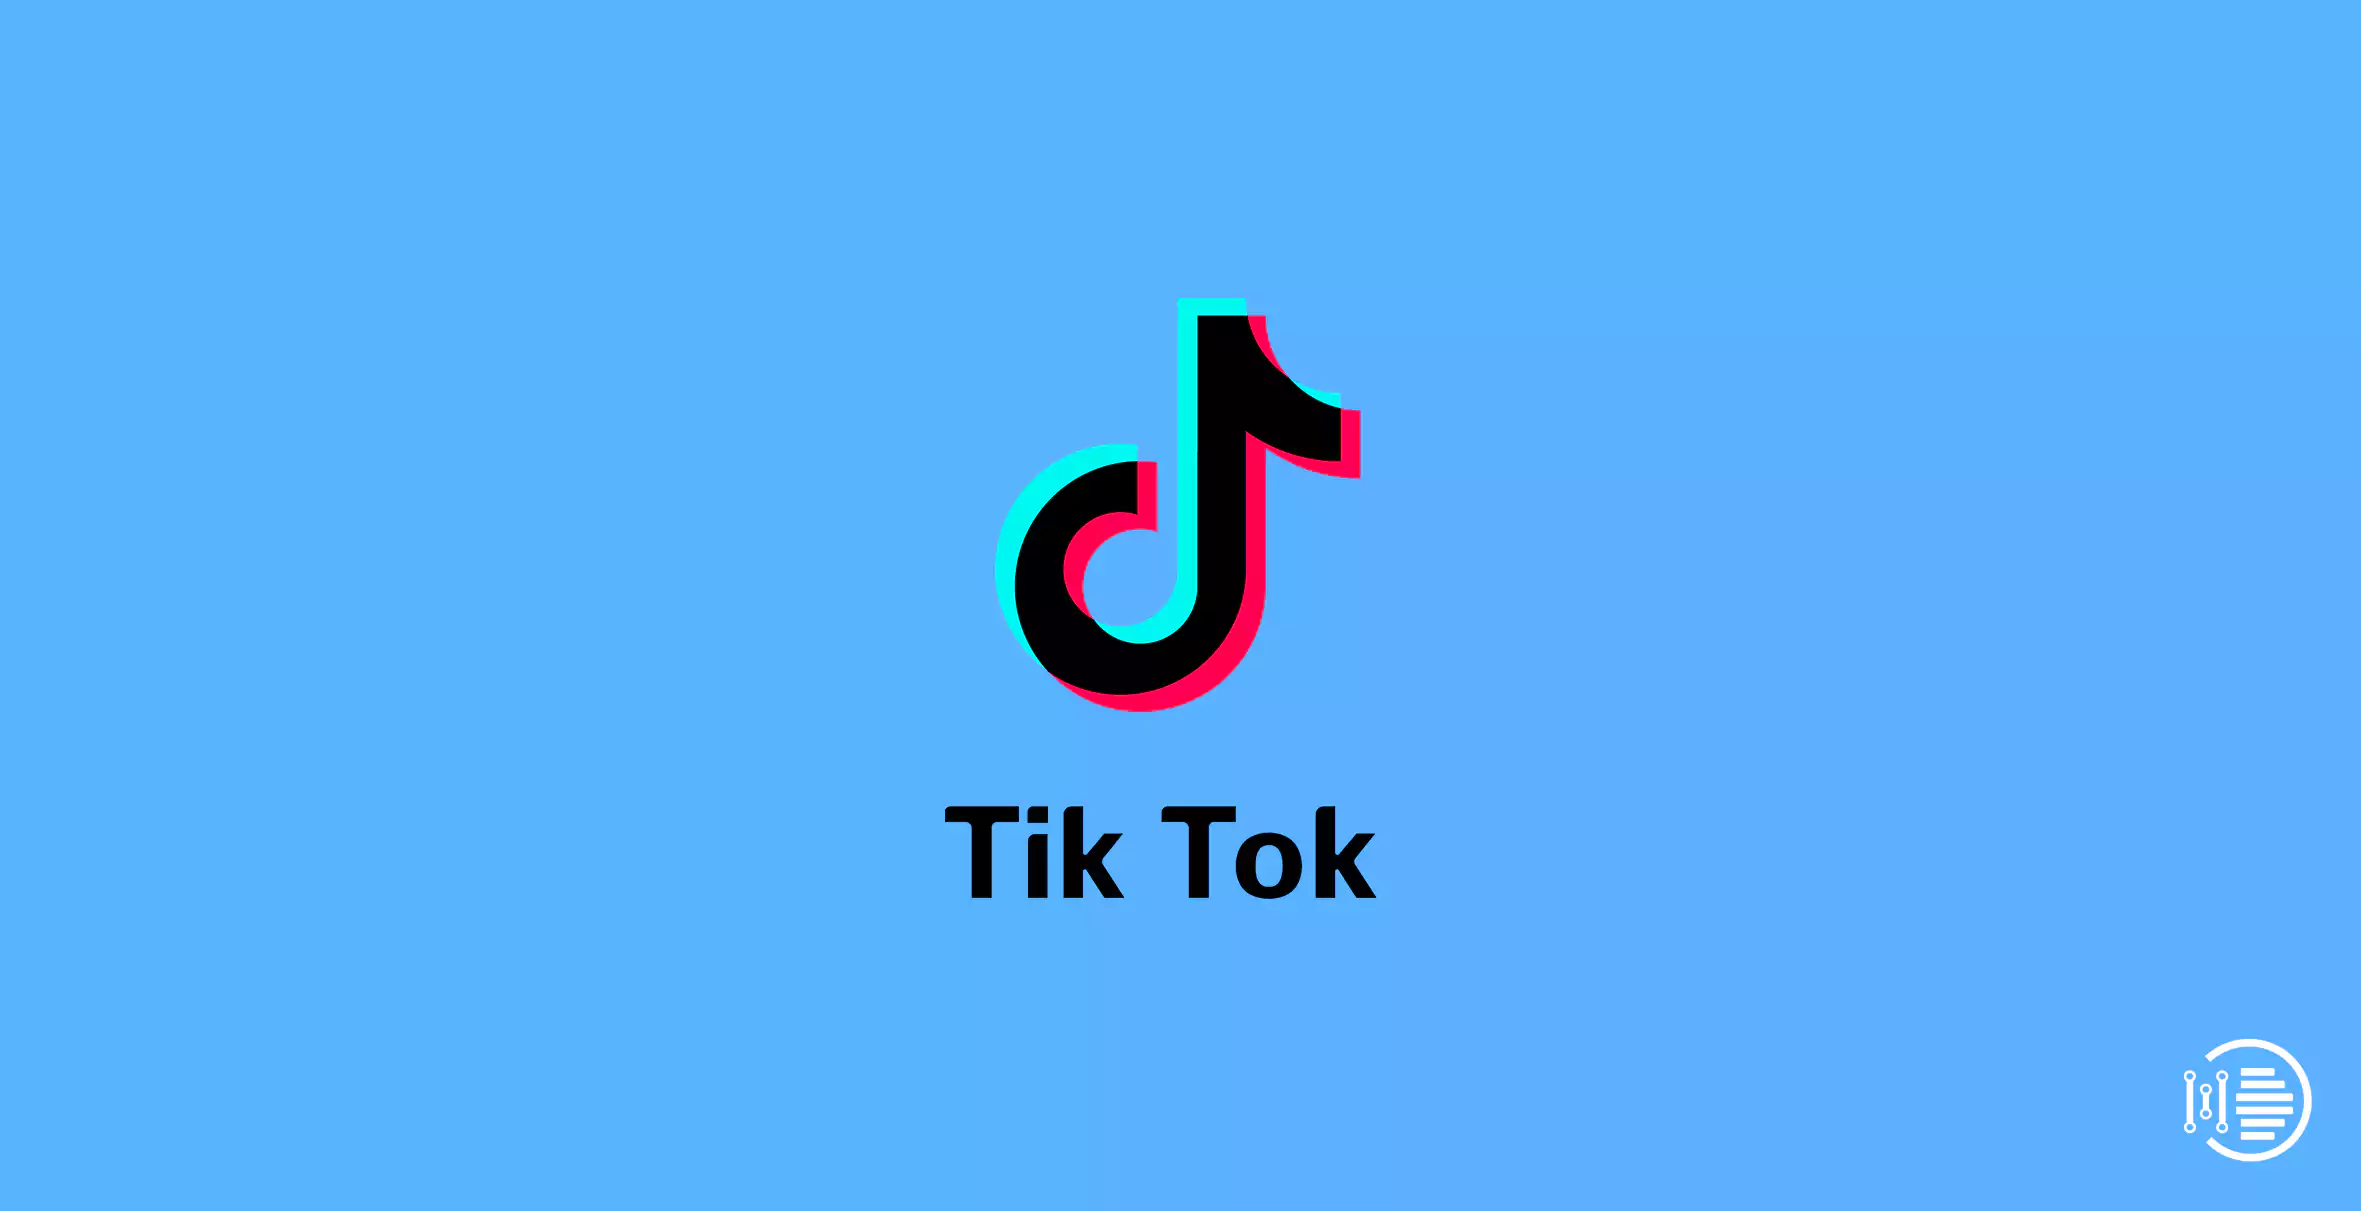 Here's how to get access to your suspended TikTok account.